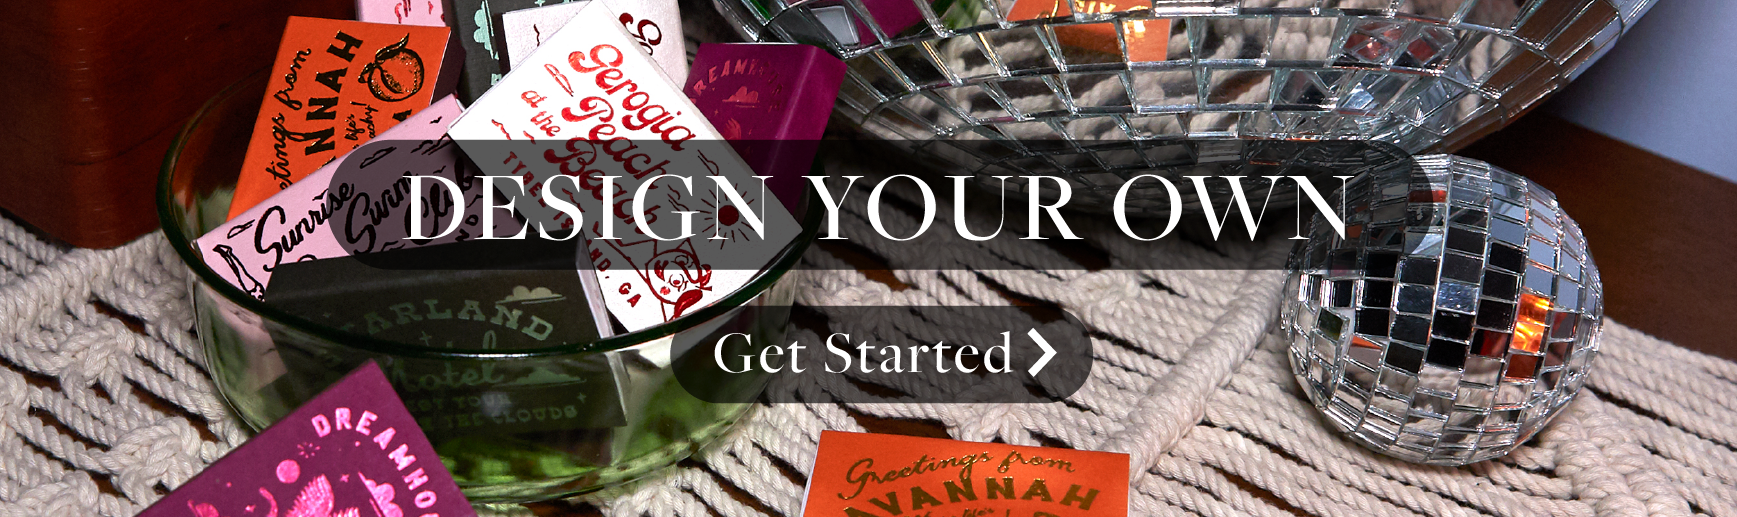 Design Your Own: Get Started